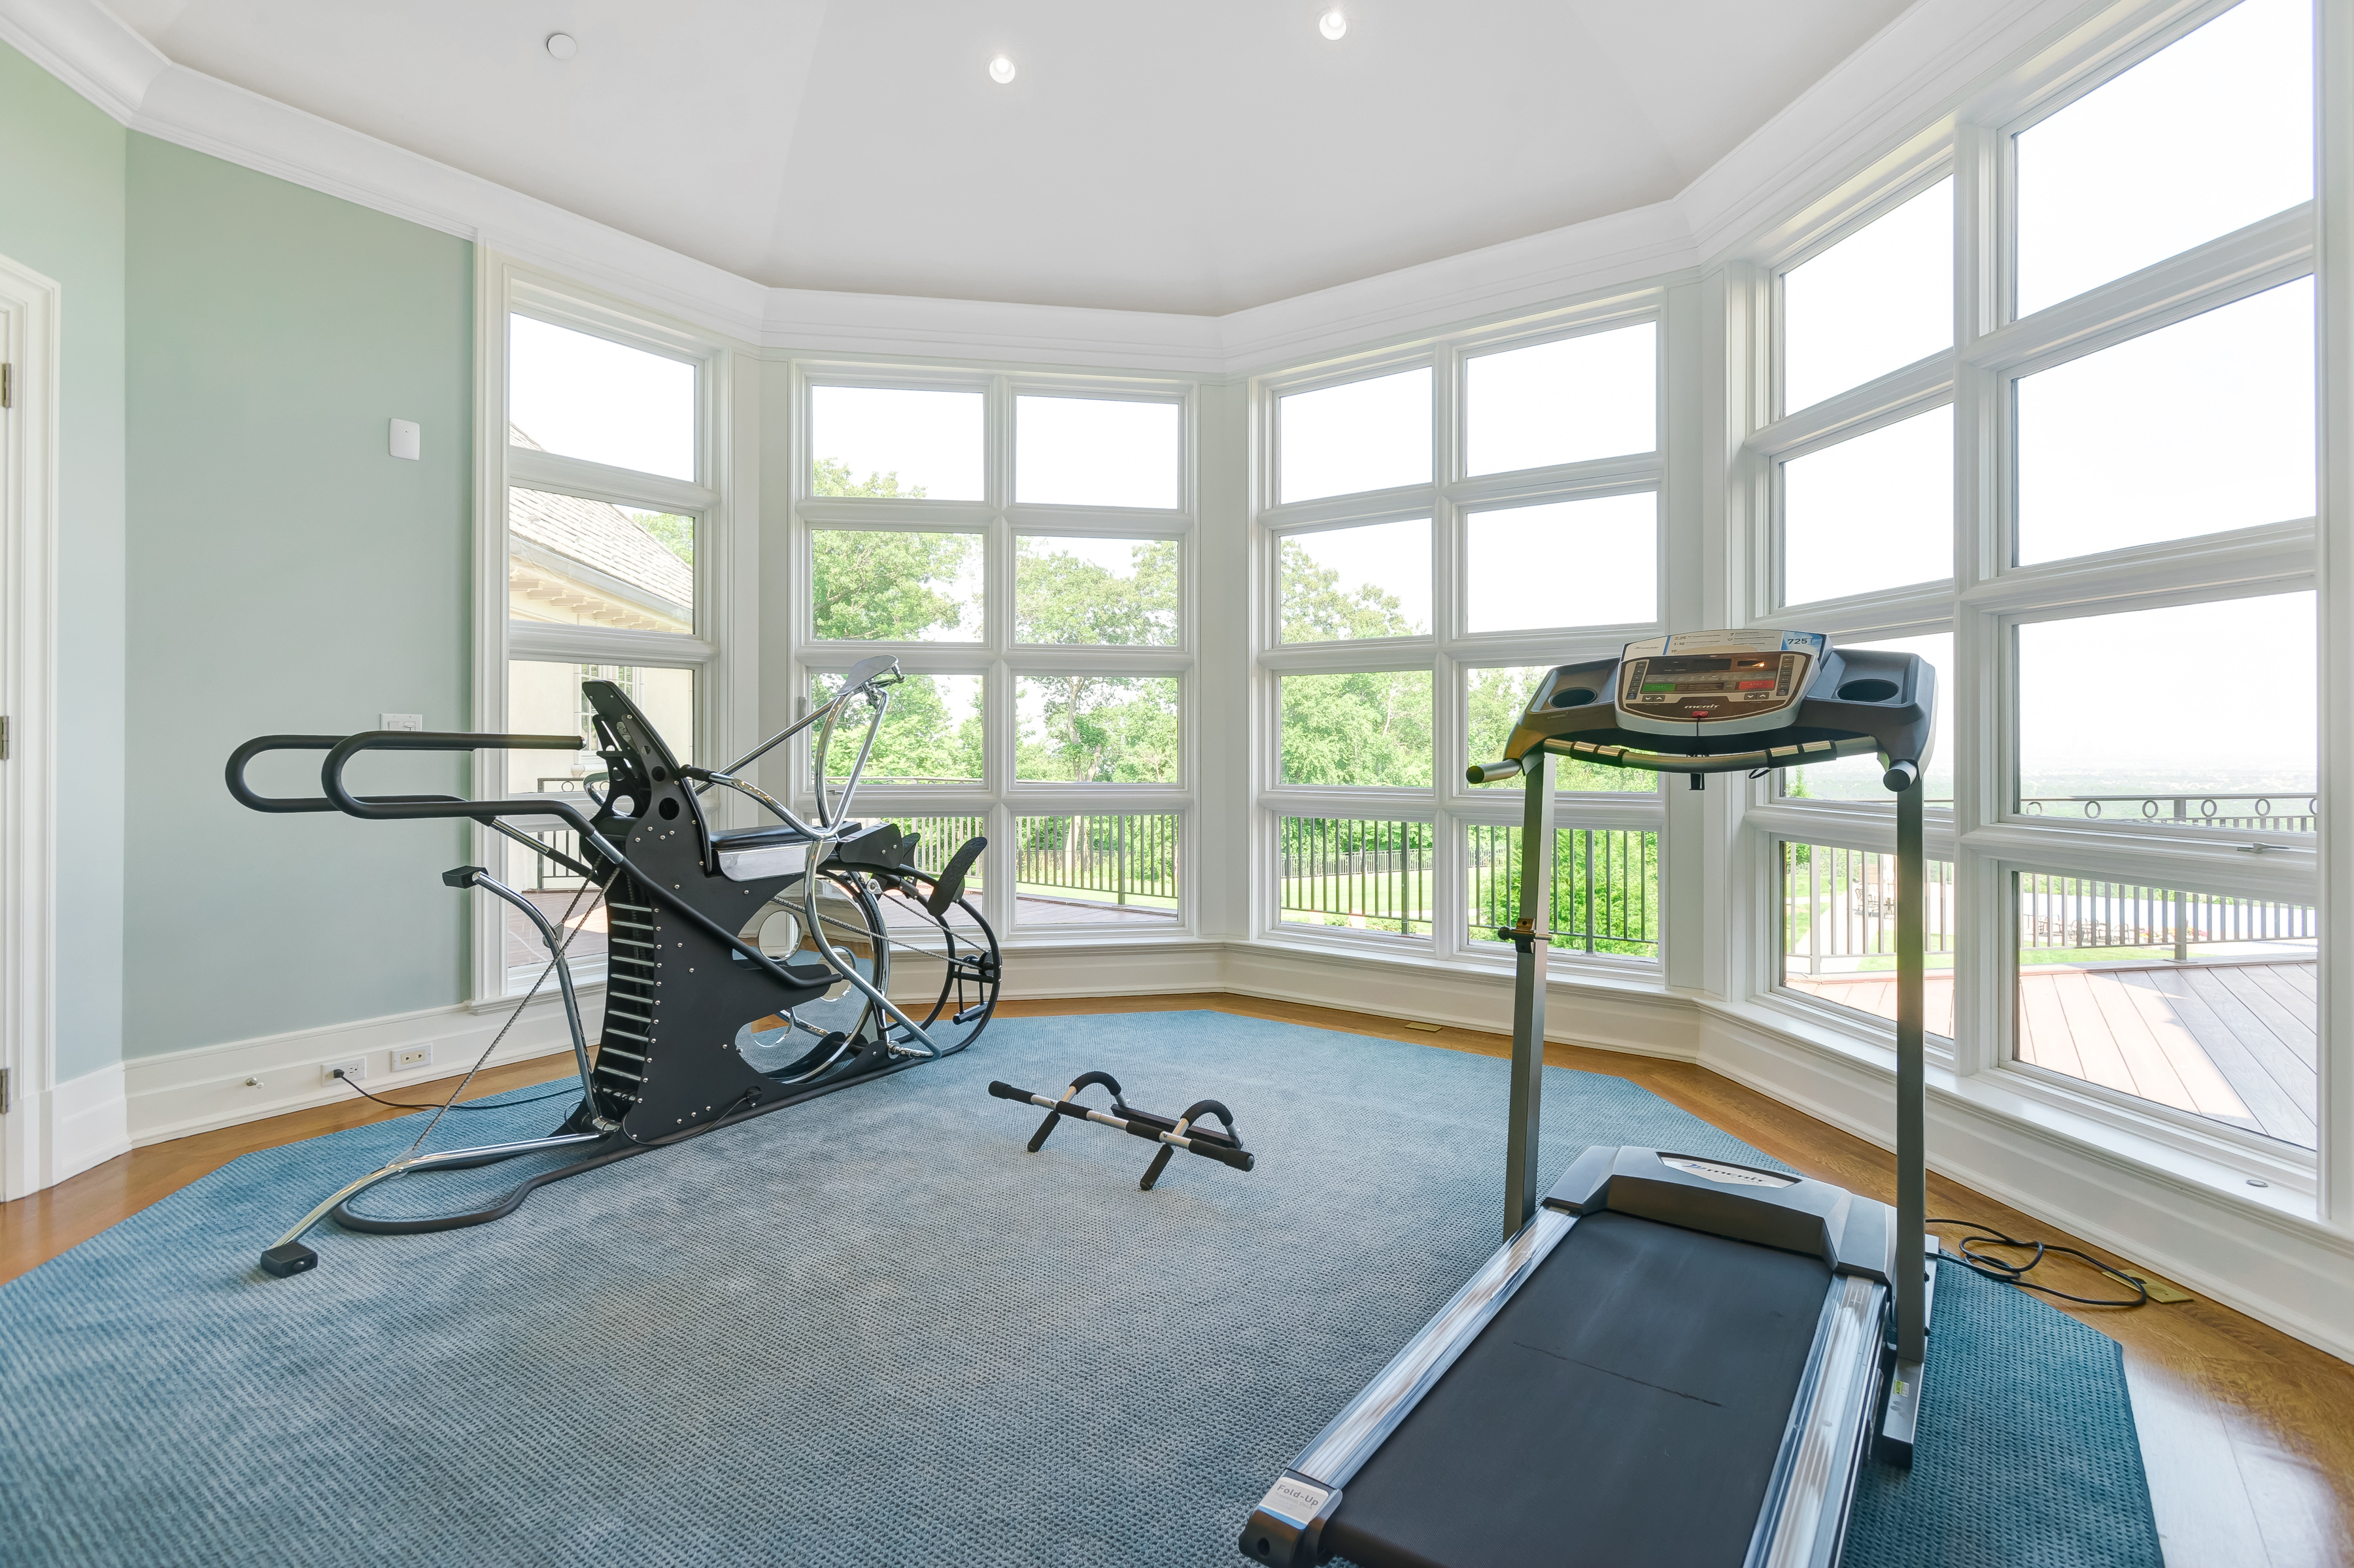 14 – 32 Club Way – Exercise Room